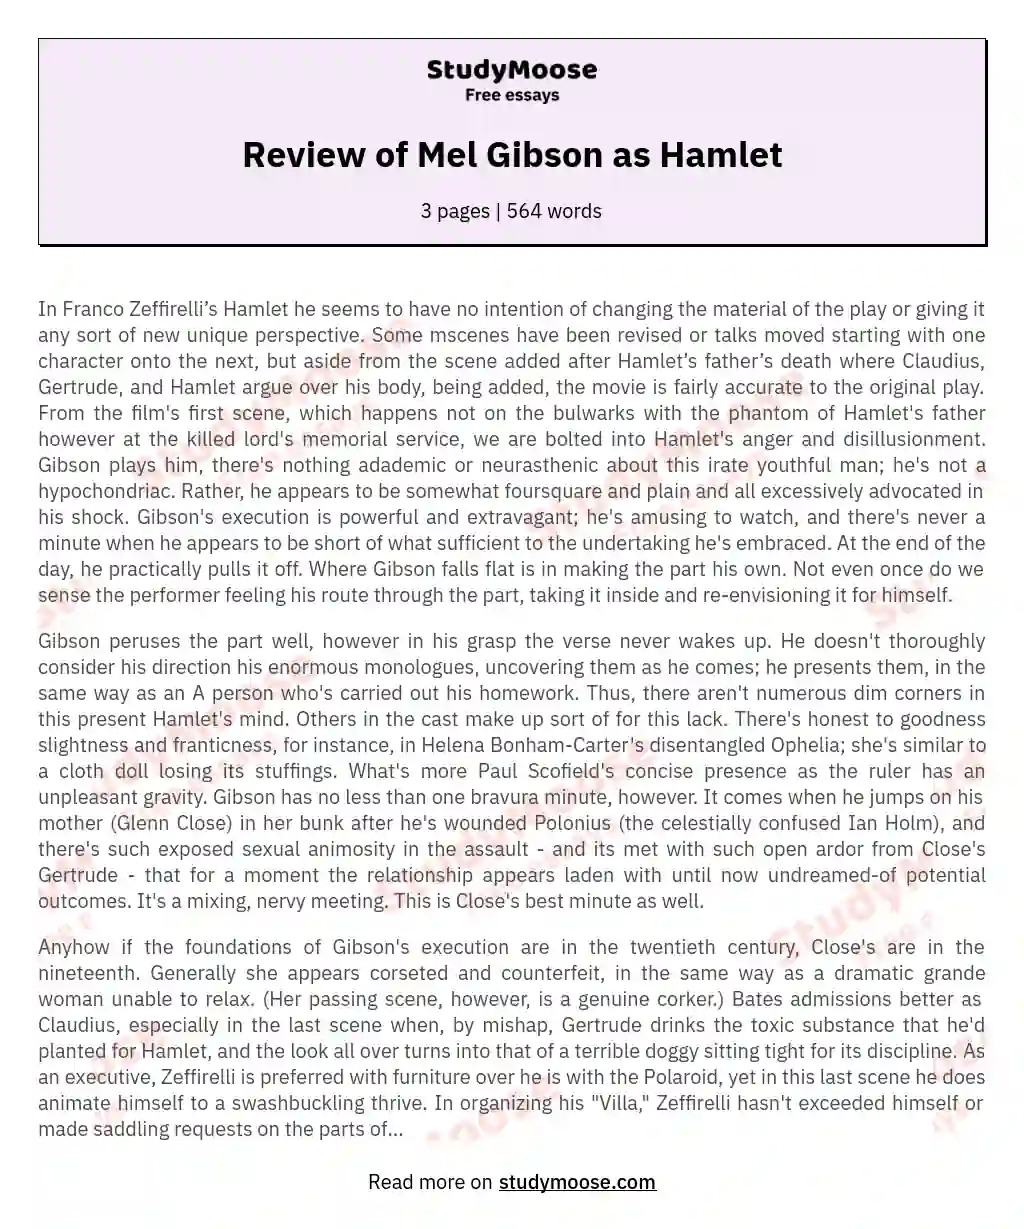 Review of Mel Gibson as Hamlet essay